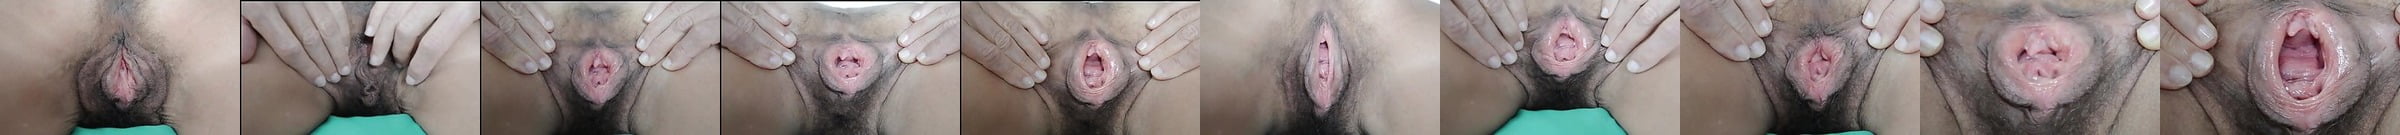 Extreme Internal Close Up Gape And Squirt Free Hd Porn Fb